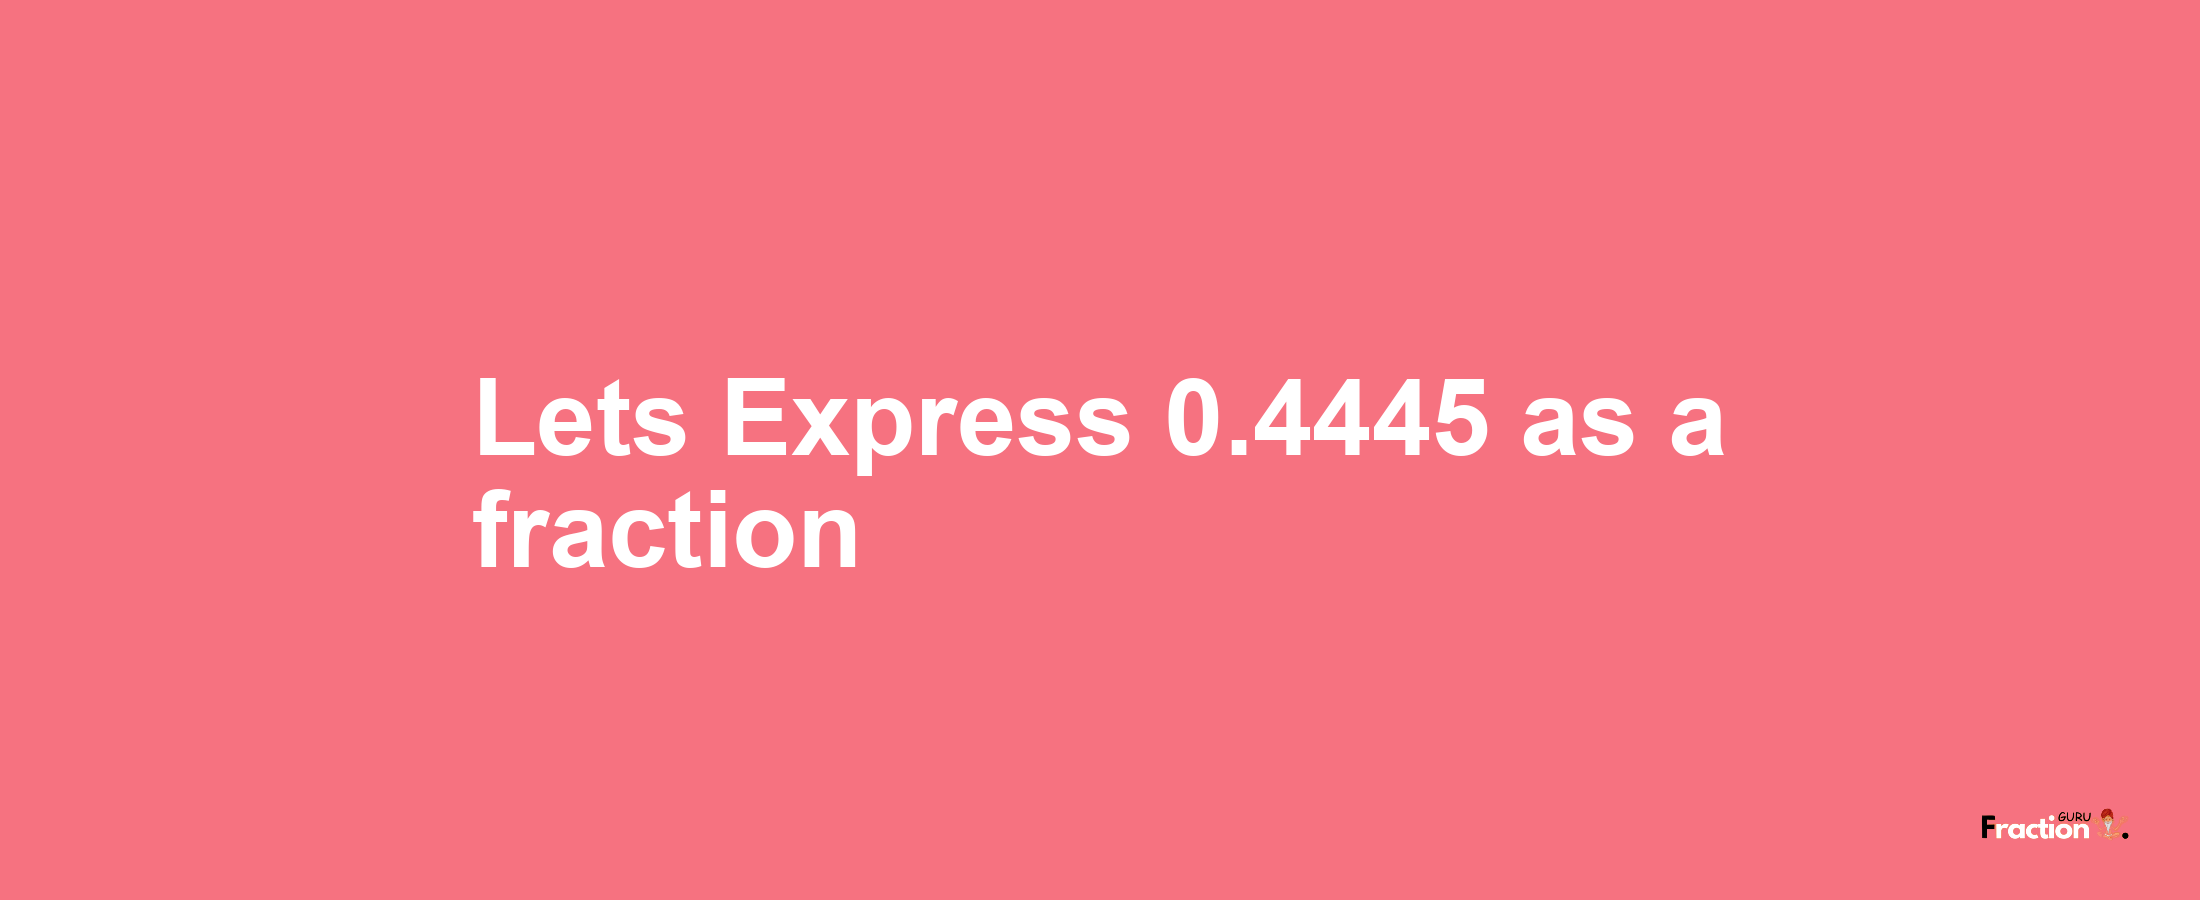 Lets Express 0.4445 as afraction